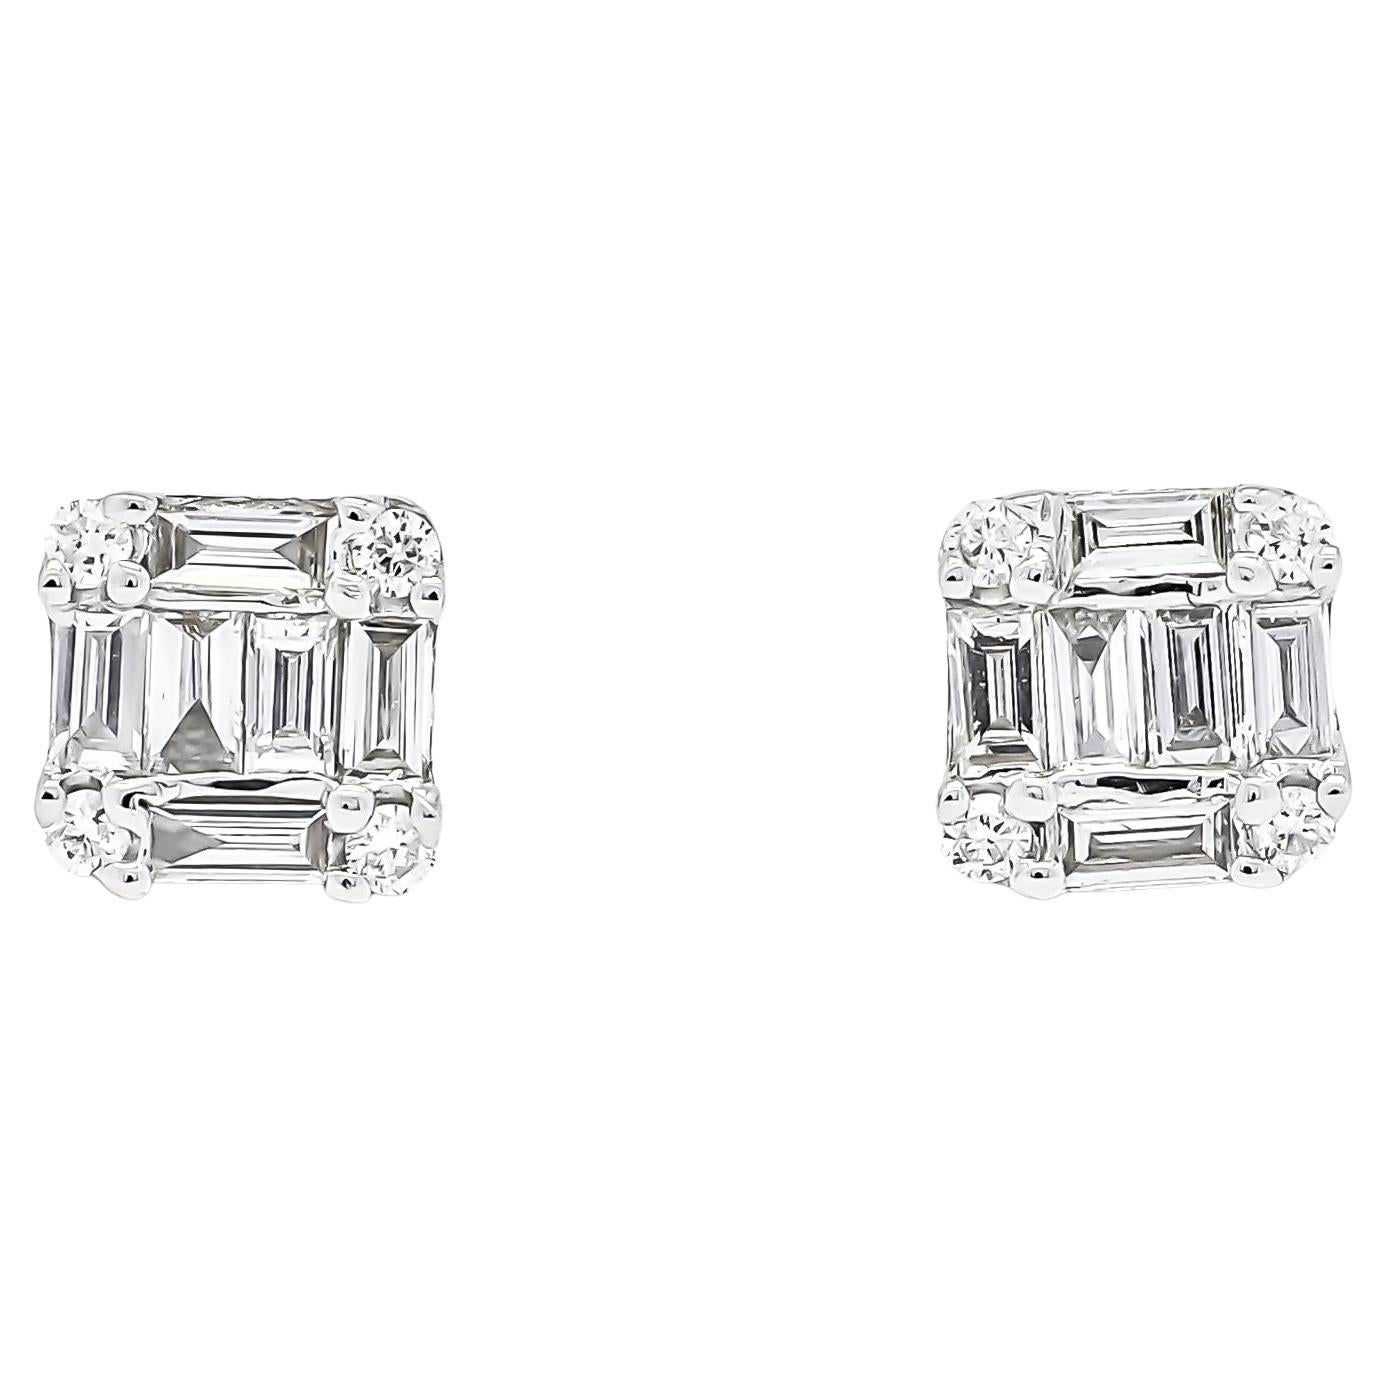 These 18KT white gold stud earrings feature a unique illusion square design, adorned with sparkling baguette cut and round brilliant natural diamonds. The cluster illusion of diamonds creates a dazzling effect, making these earrings a best-seller.